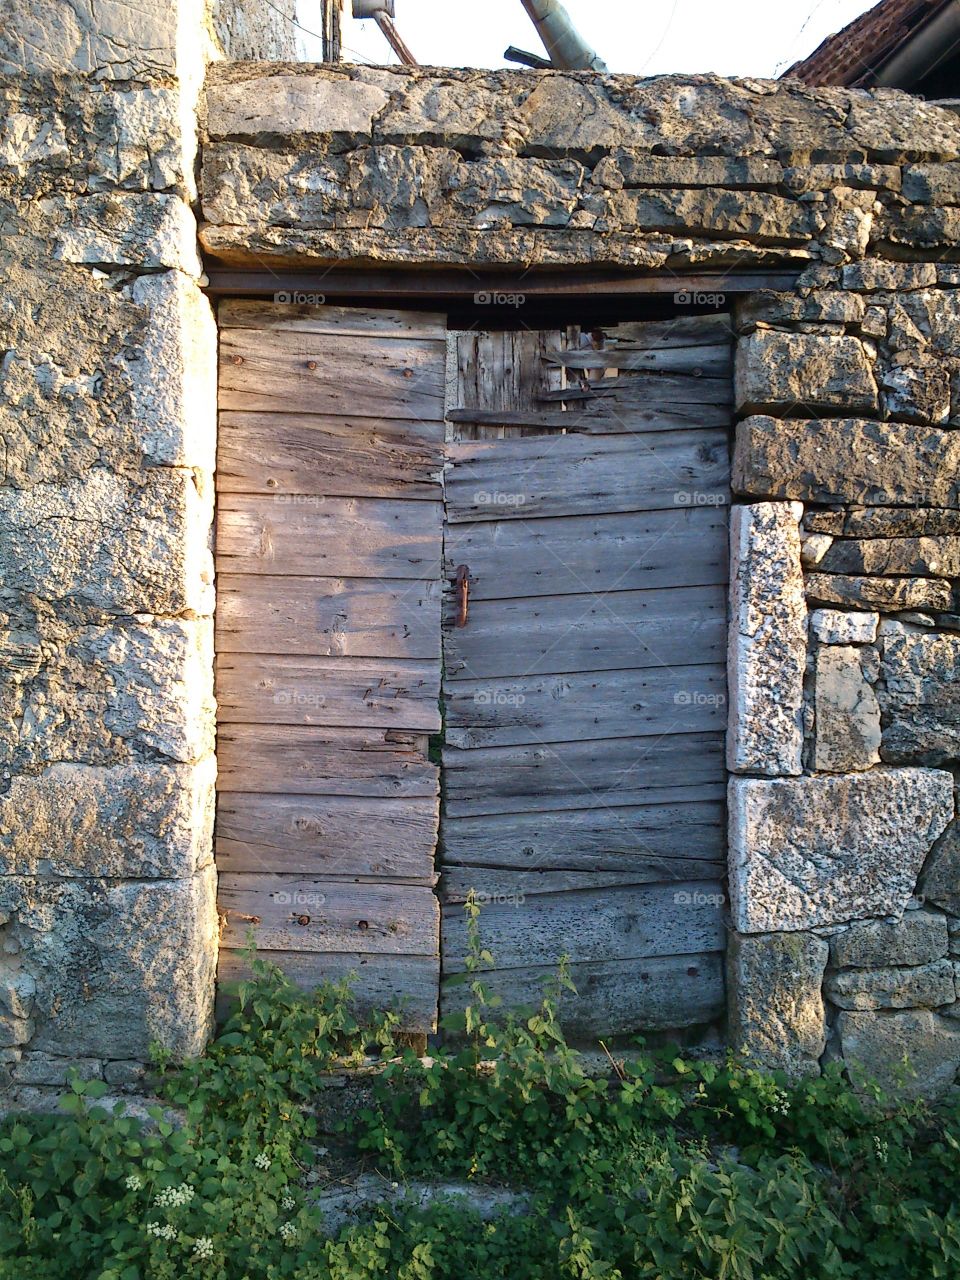 lost in time 3. old wooden doors